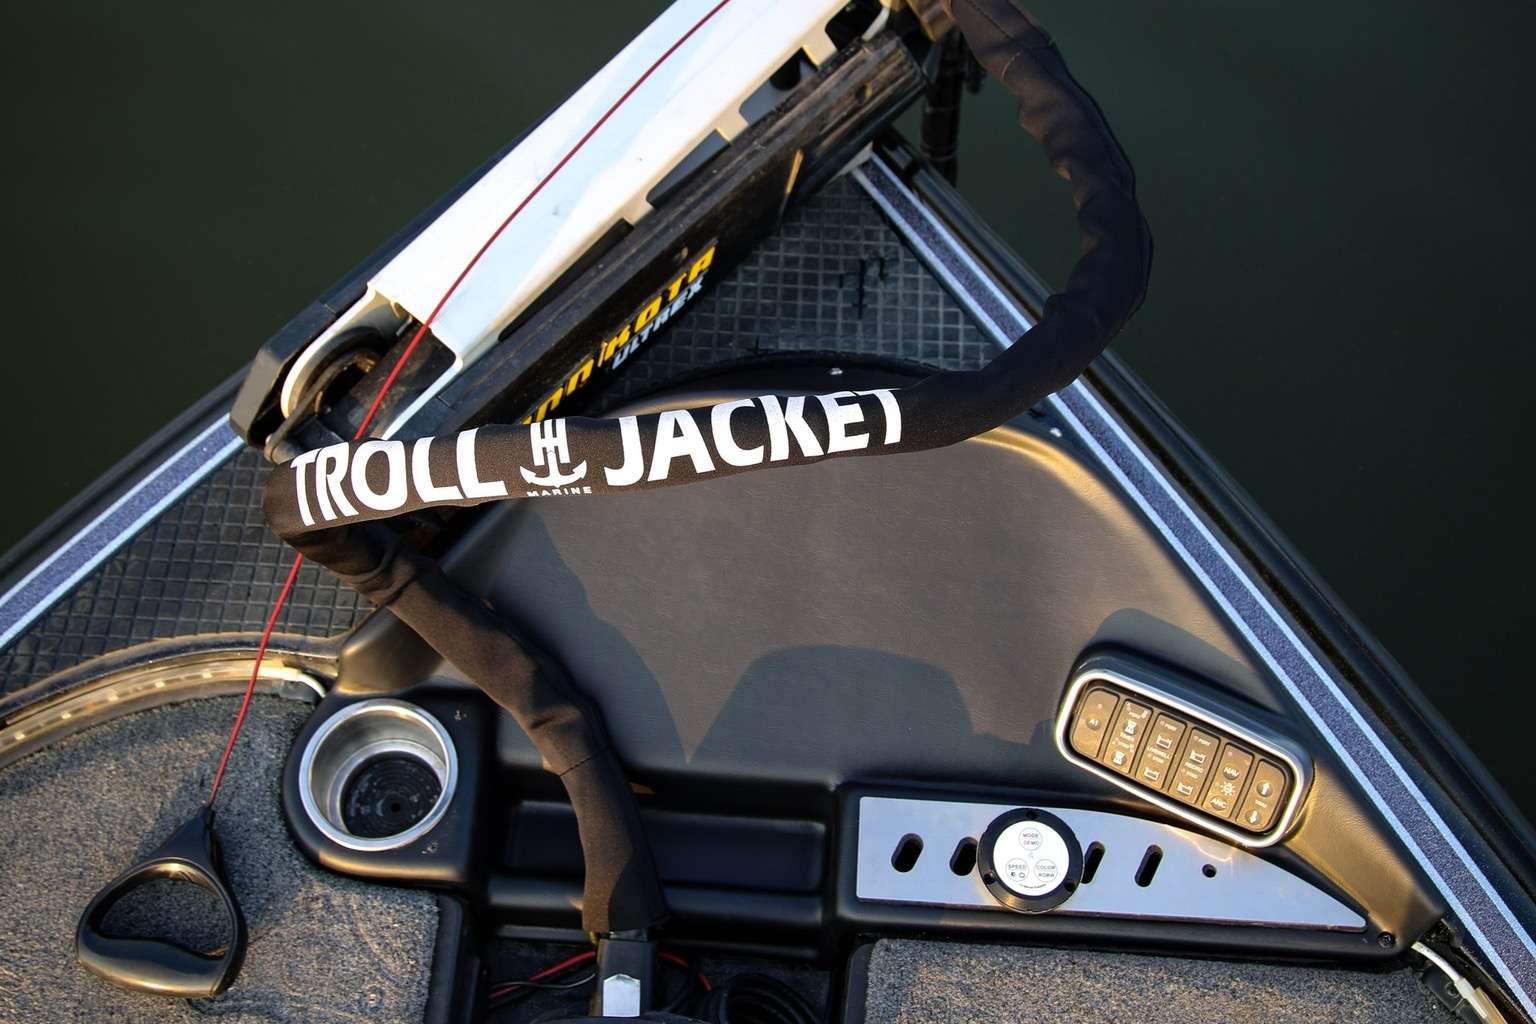 <h4>TROLL JACKET Trolling Motor Cable Organizer Sleeve</h4> With the TROLL JACKET, you can protect and manage your trolling motor cables with ease. The G-FORCE TROLL JACKET is a 2mm neoprene trolling motor wire and cable organizer. It measures 60â long and includes a velcro closure. While wrapped, the diameter is about 1.5â.
<BR><BR>
It easily allows you to streamline disorganized bundles of wire and eliminate the need for zip ties along the factory cable cover. TROLL JACKET can even help contain and protect adjacent wires, like those for your depth finder and HYDROWAVE. Once bundled, they have an additional layer of defense against the elements, hooks, and other potential threats.
<BR><BR>
<A HREF=